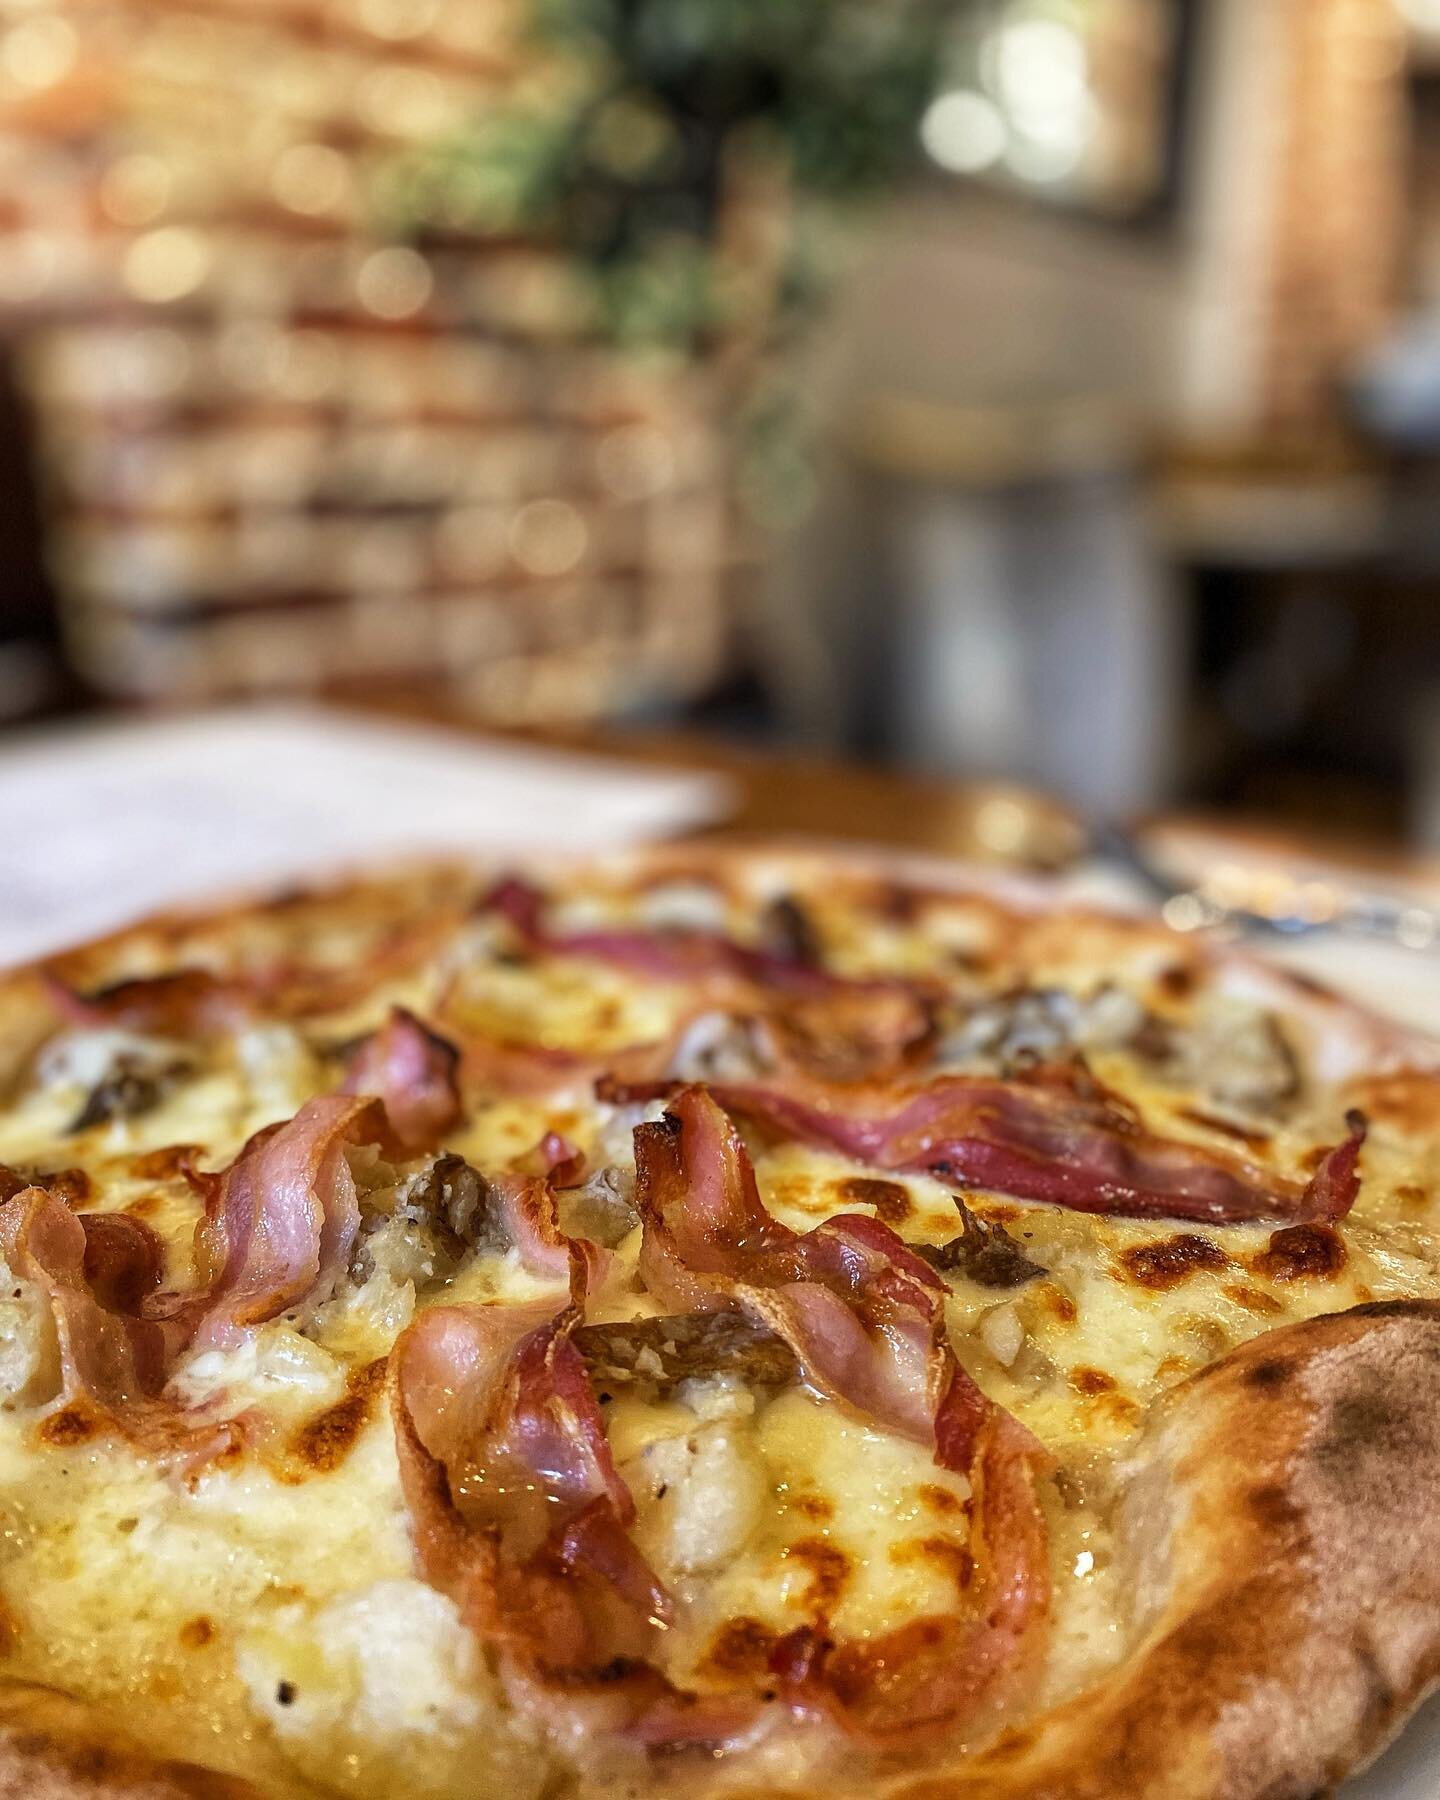 Our first post this year will be dedicated to this fabulous Pizza con Patate -&gt; white pizza with herb and garlic potatoes and thinly sliced guanciale (pork cheek) &hellip; 

Trust us on this one it is the best Pizza you will ever have 😋 🍕 
Avail